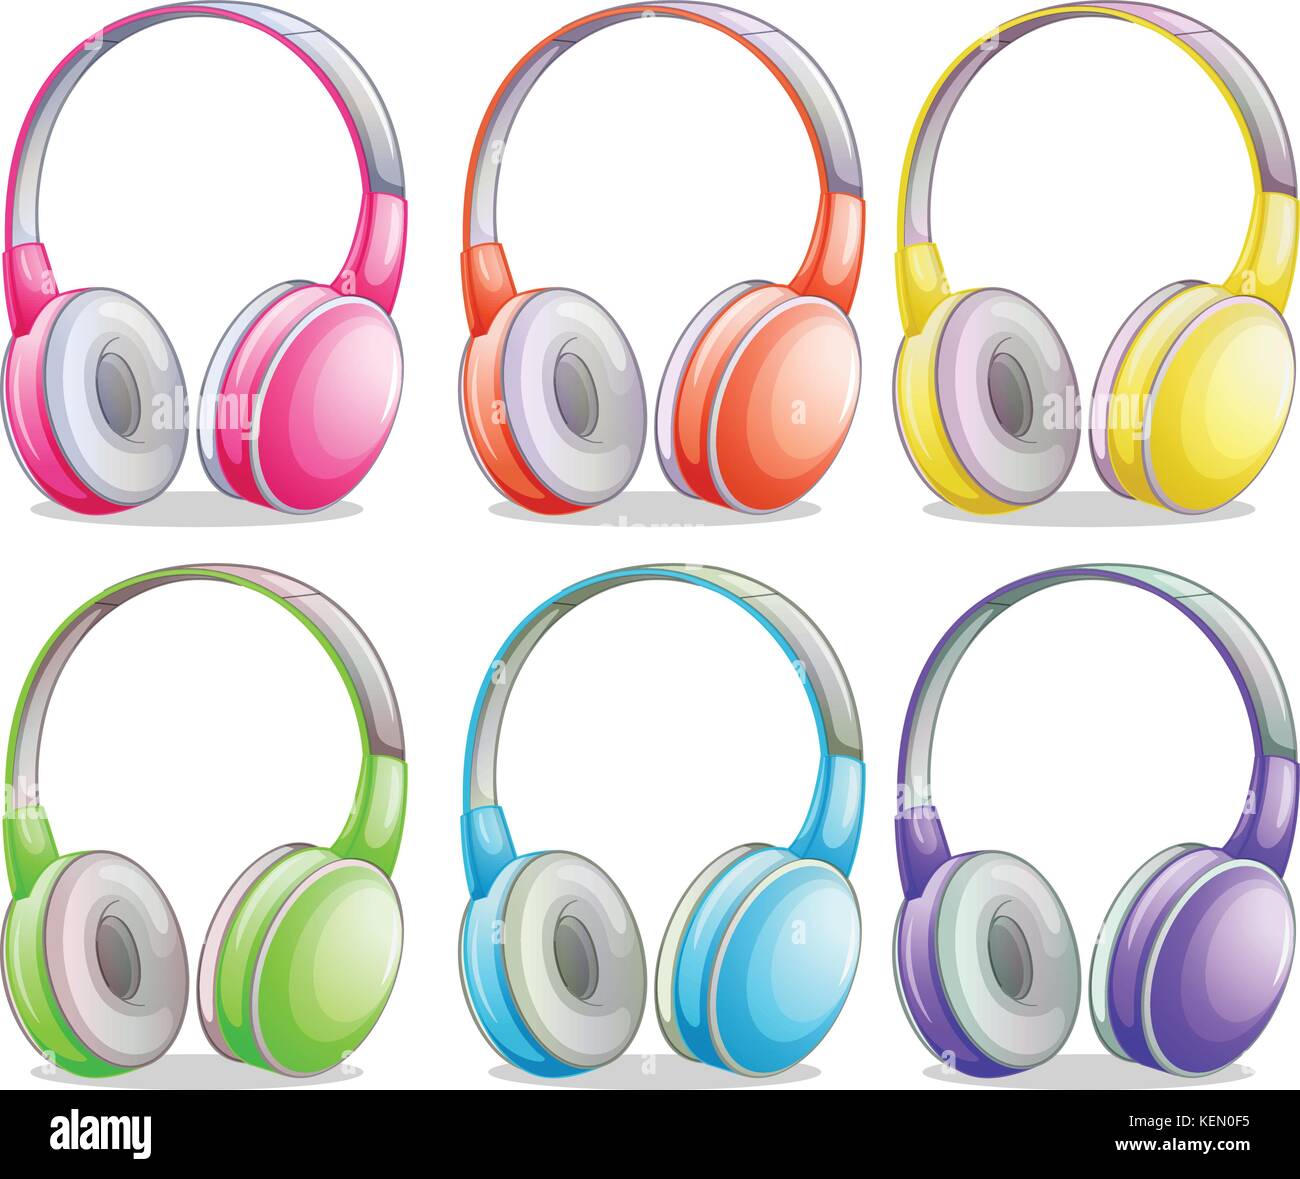 Illustration of different color headphones Stock Vector